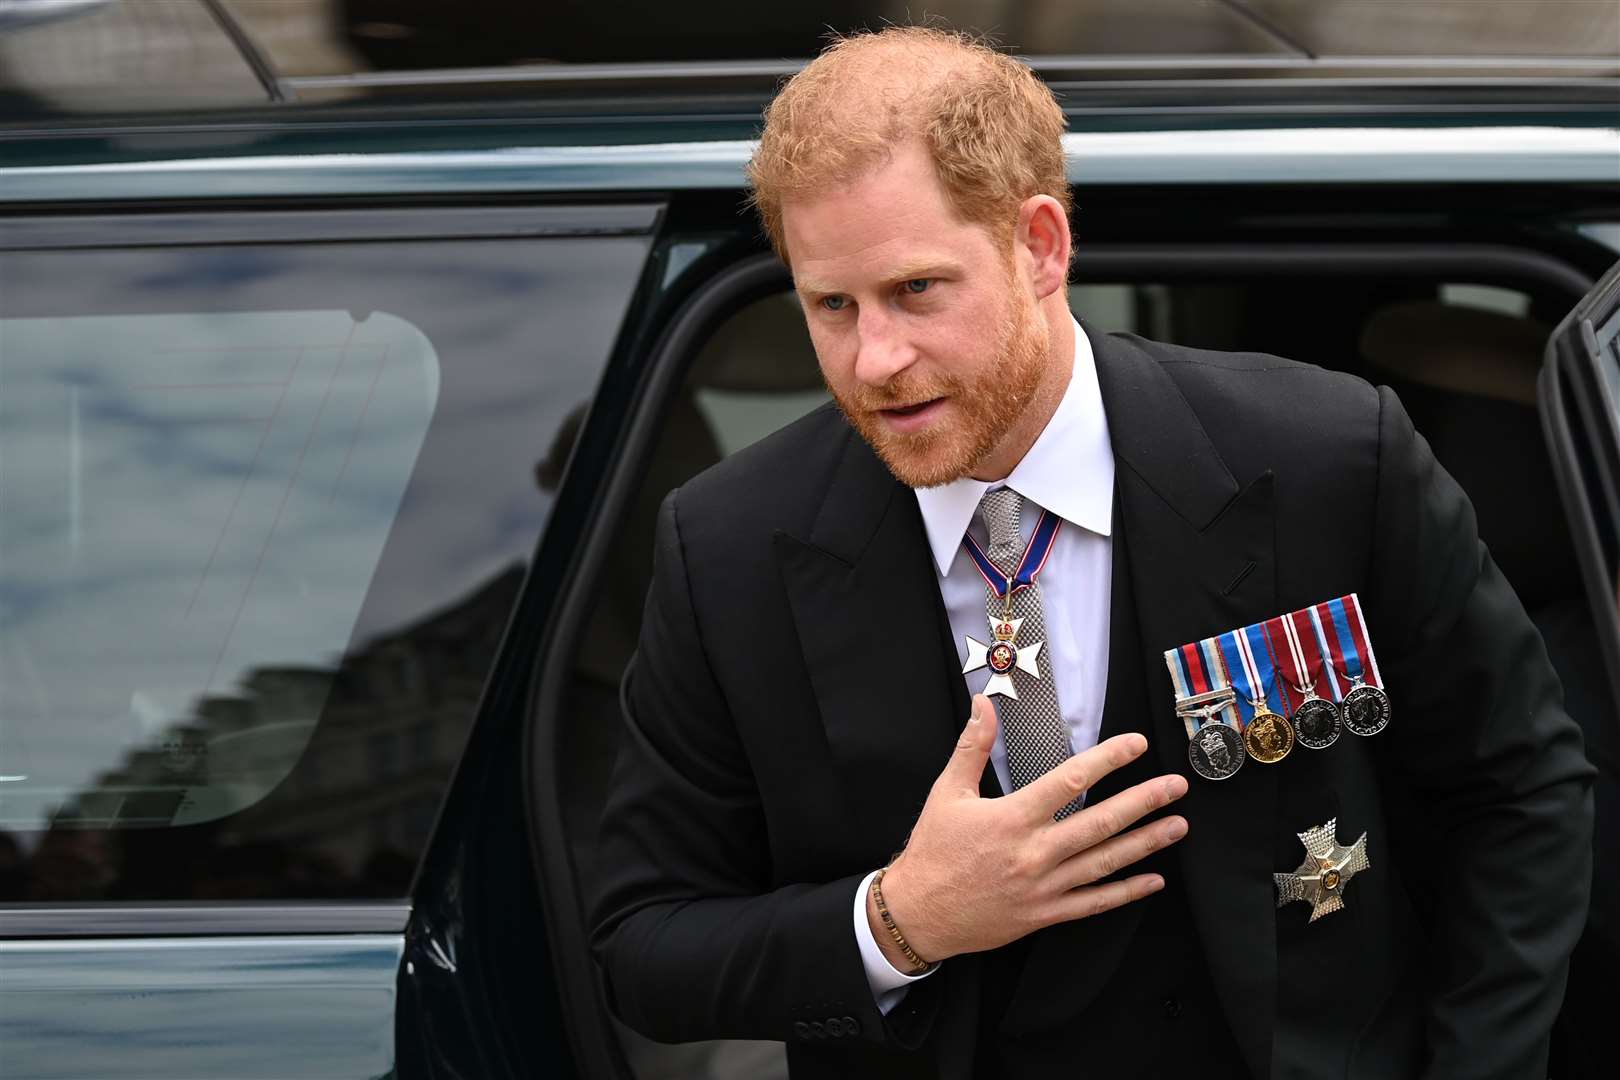 The Duke of Sussex in London earlier in June, during the Queen’s Platinum Jubilee celebrations (PA)